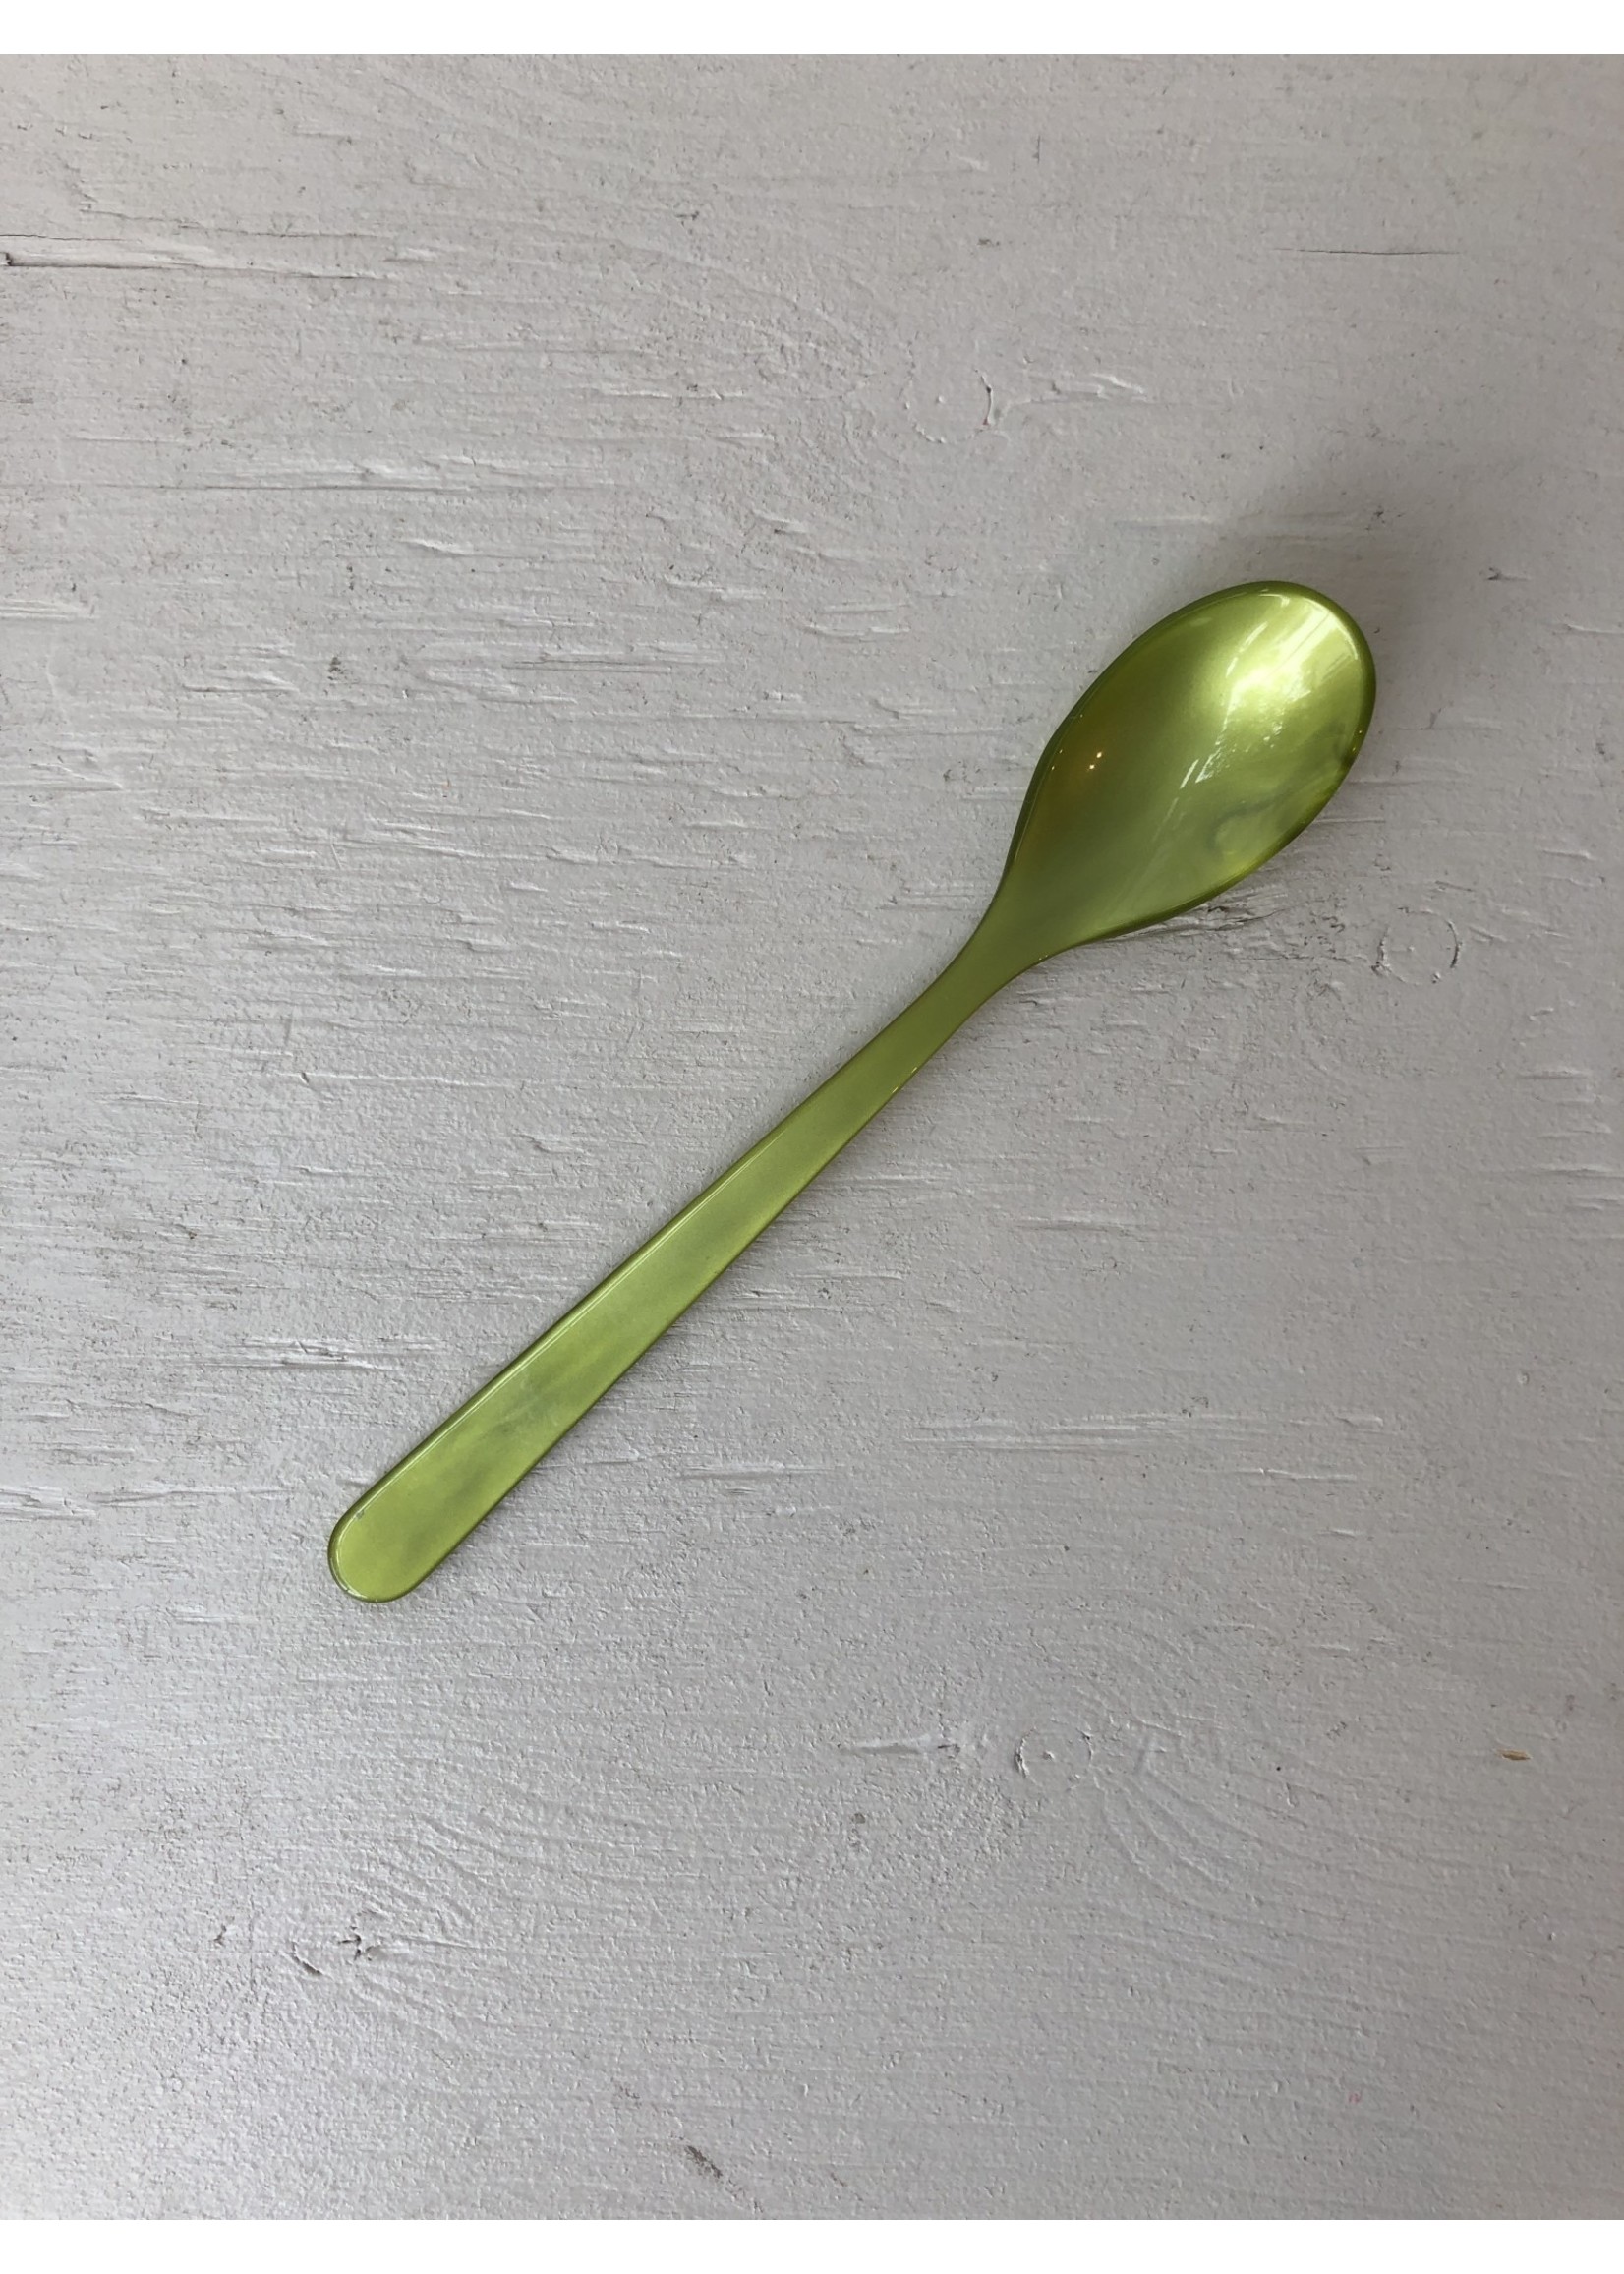 Heim Sohne Cereal Spoons by Heim Söhne